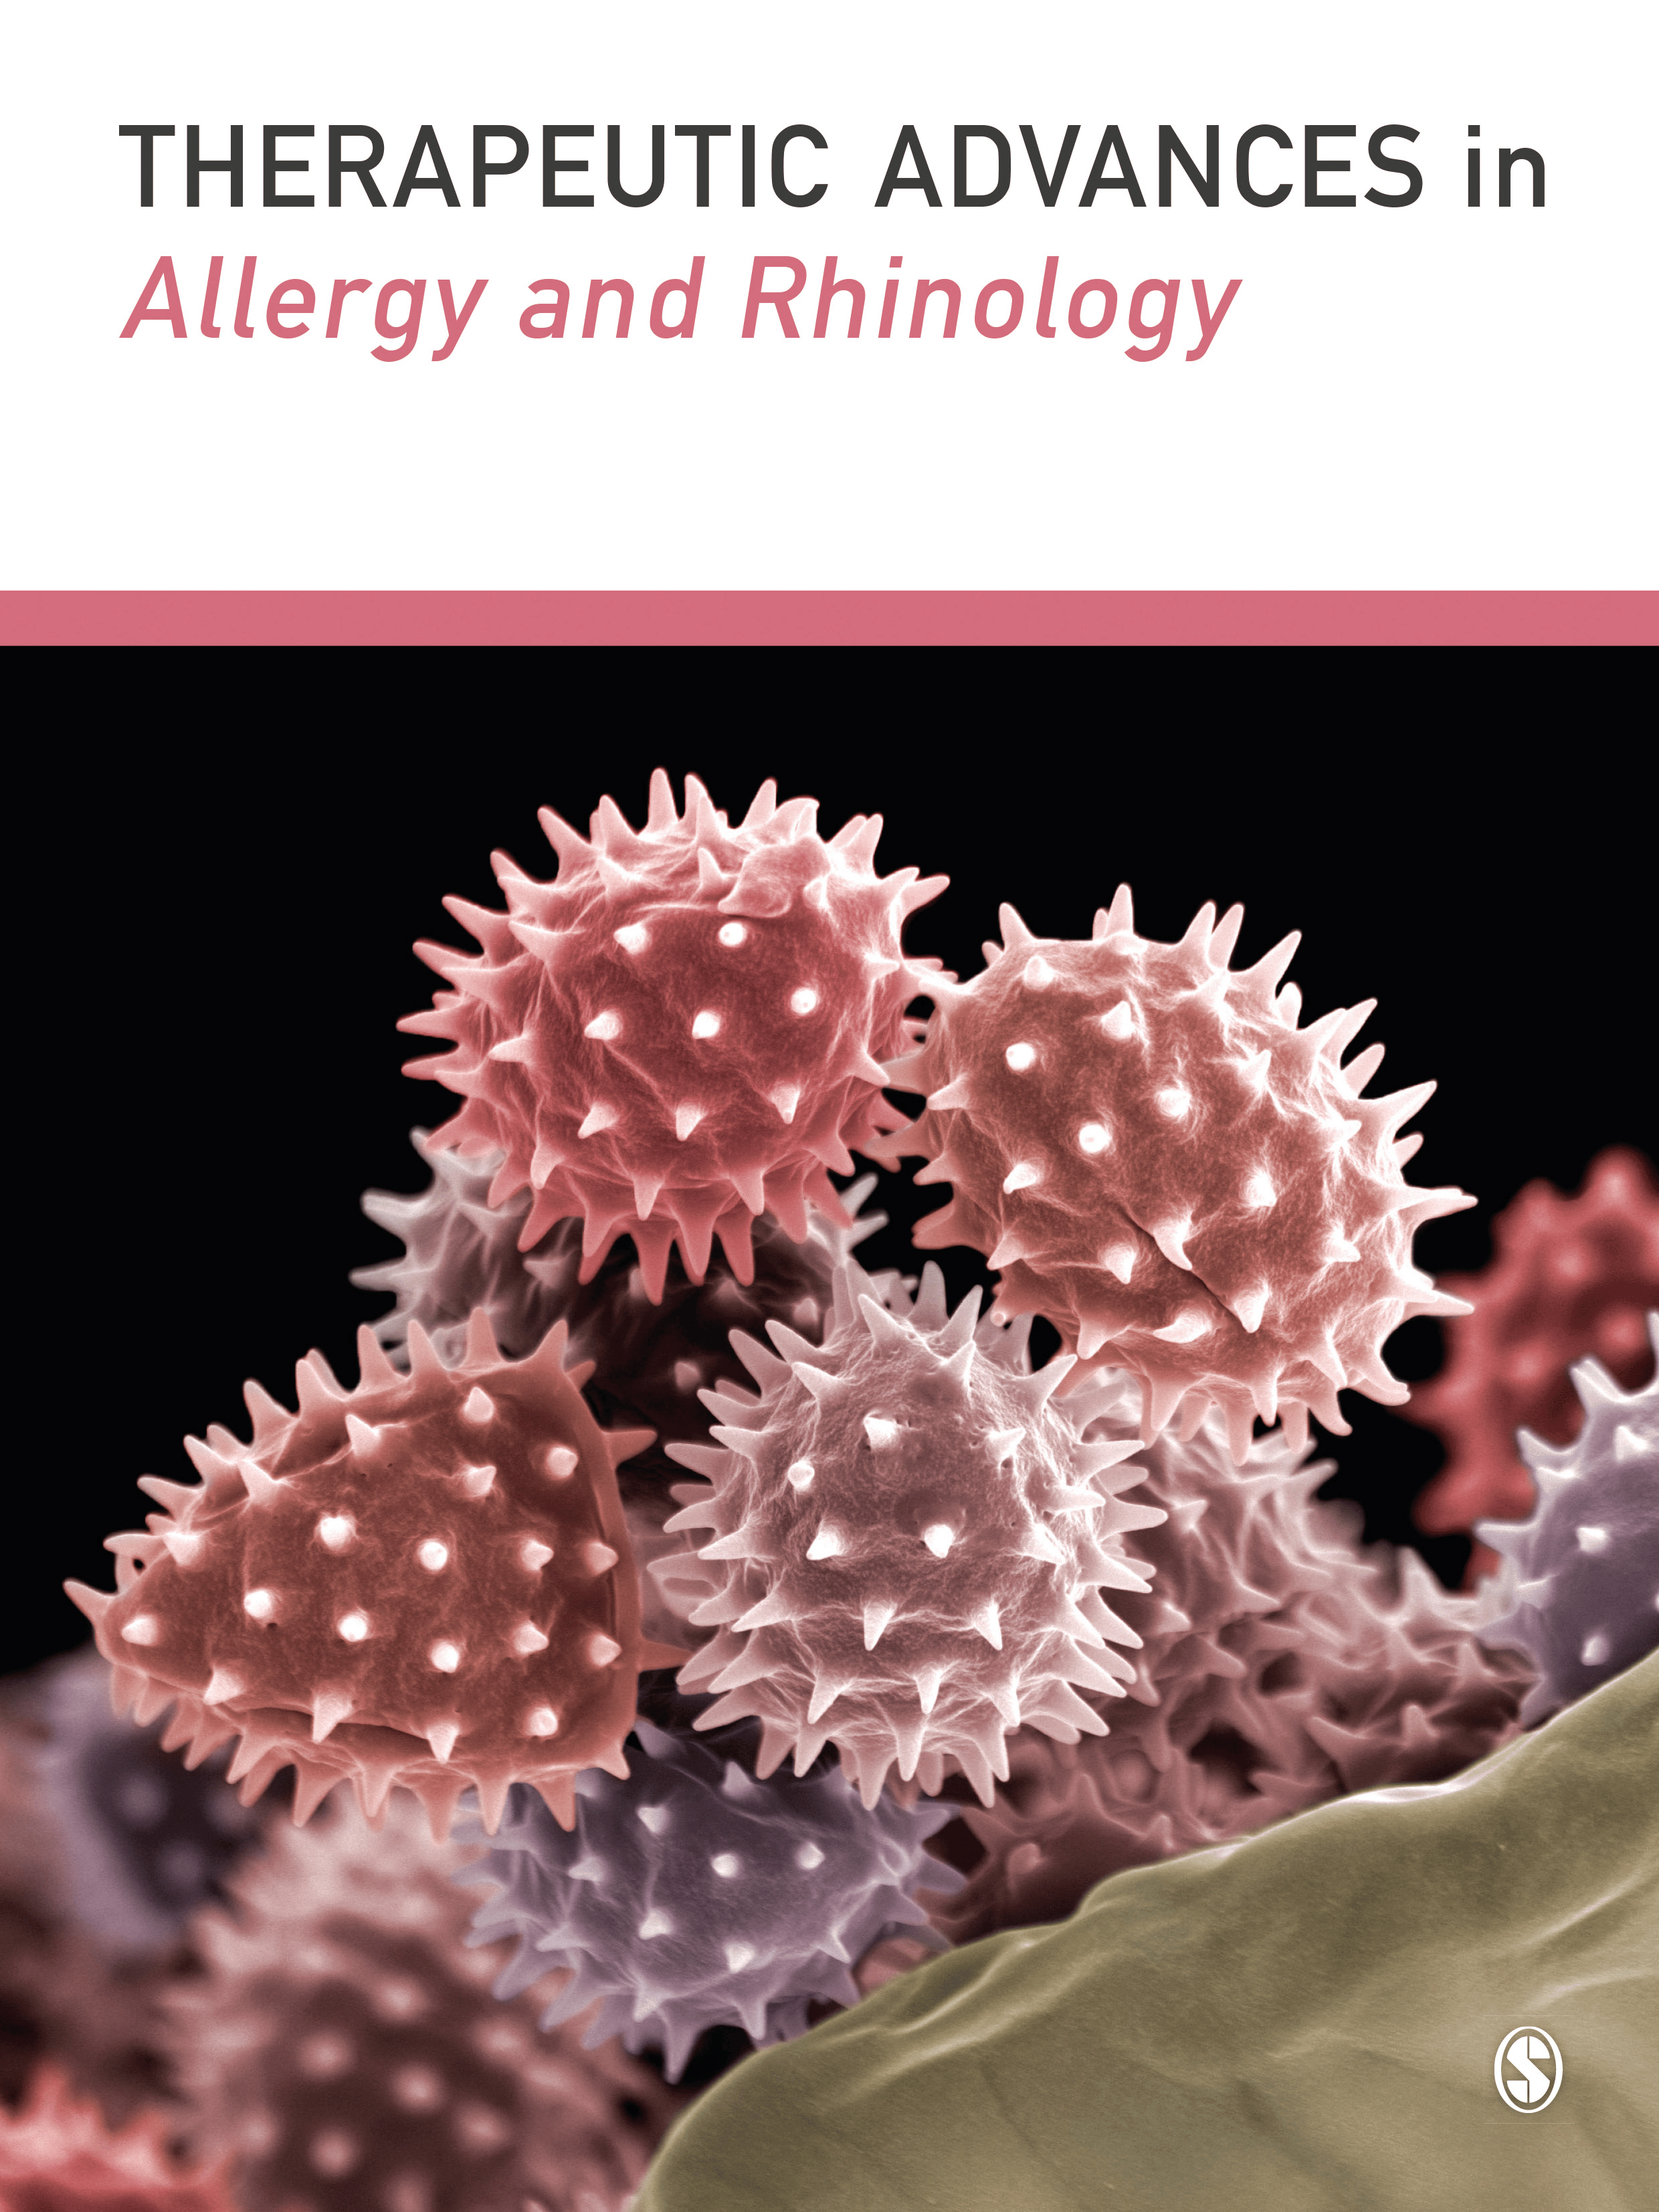 Therapeutic advances in allergy & rhinology.